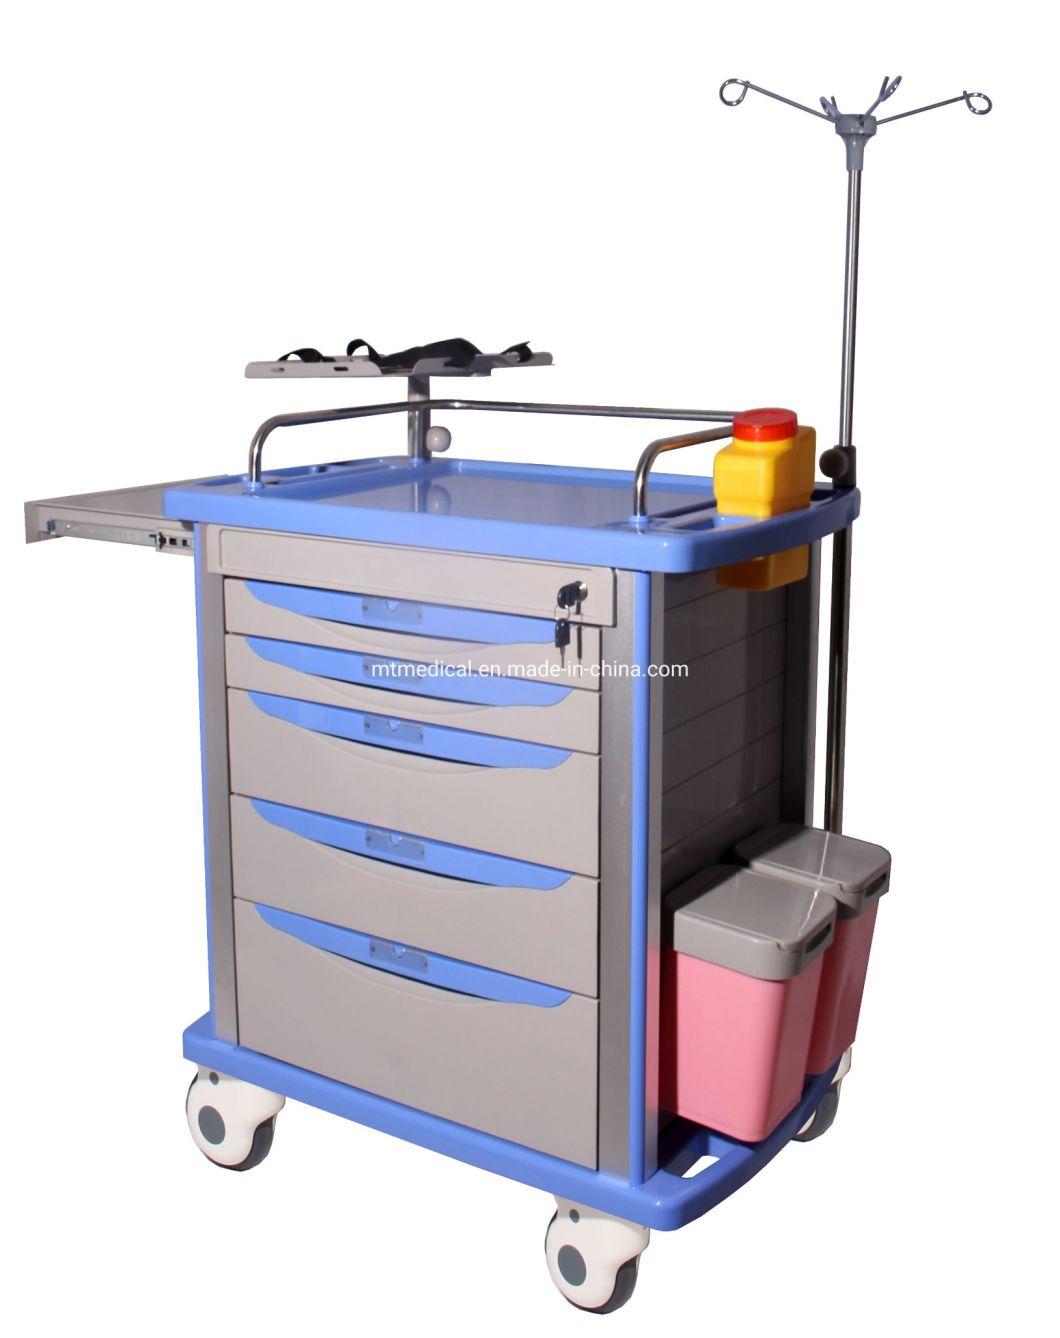 Cq-02 Medical Supplies ABS Price for Medicine Trolley Suppliers